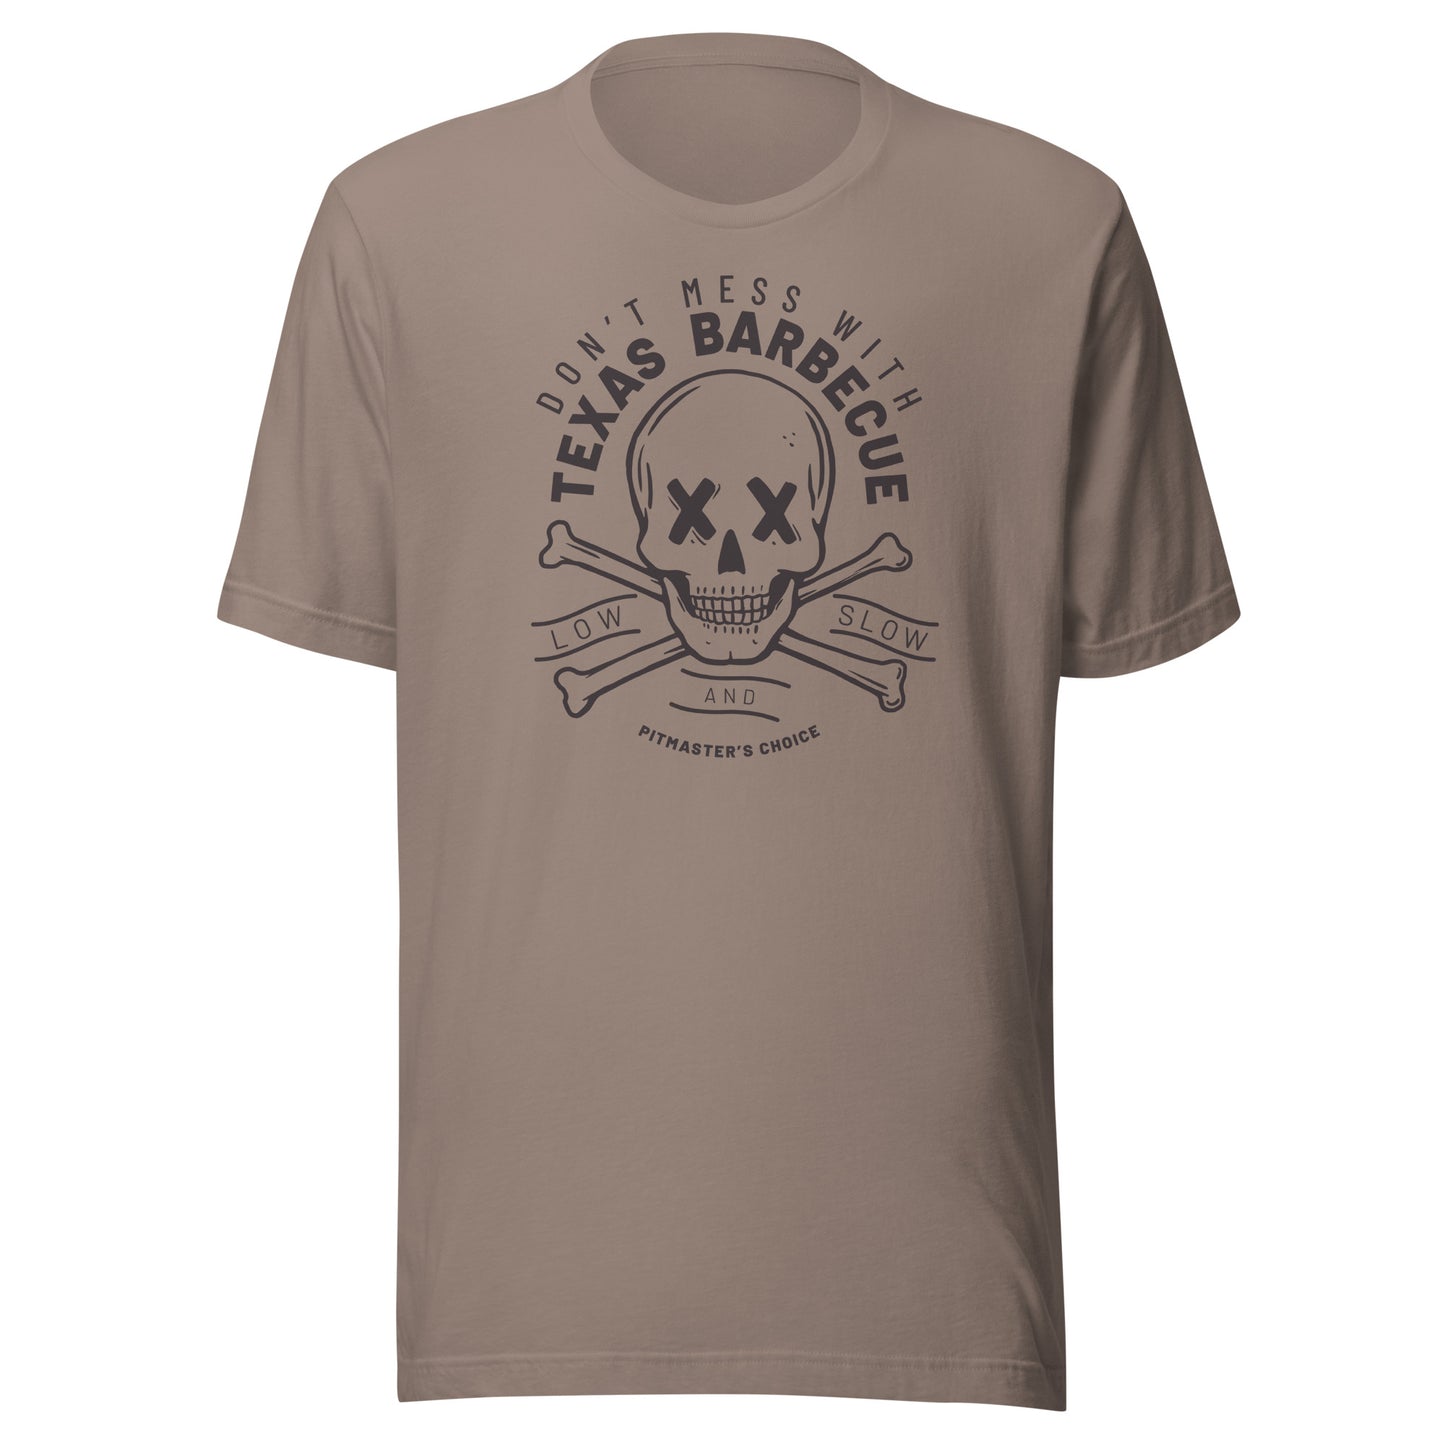 Don't Mess With Texas Barbecue T-shirt